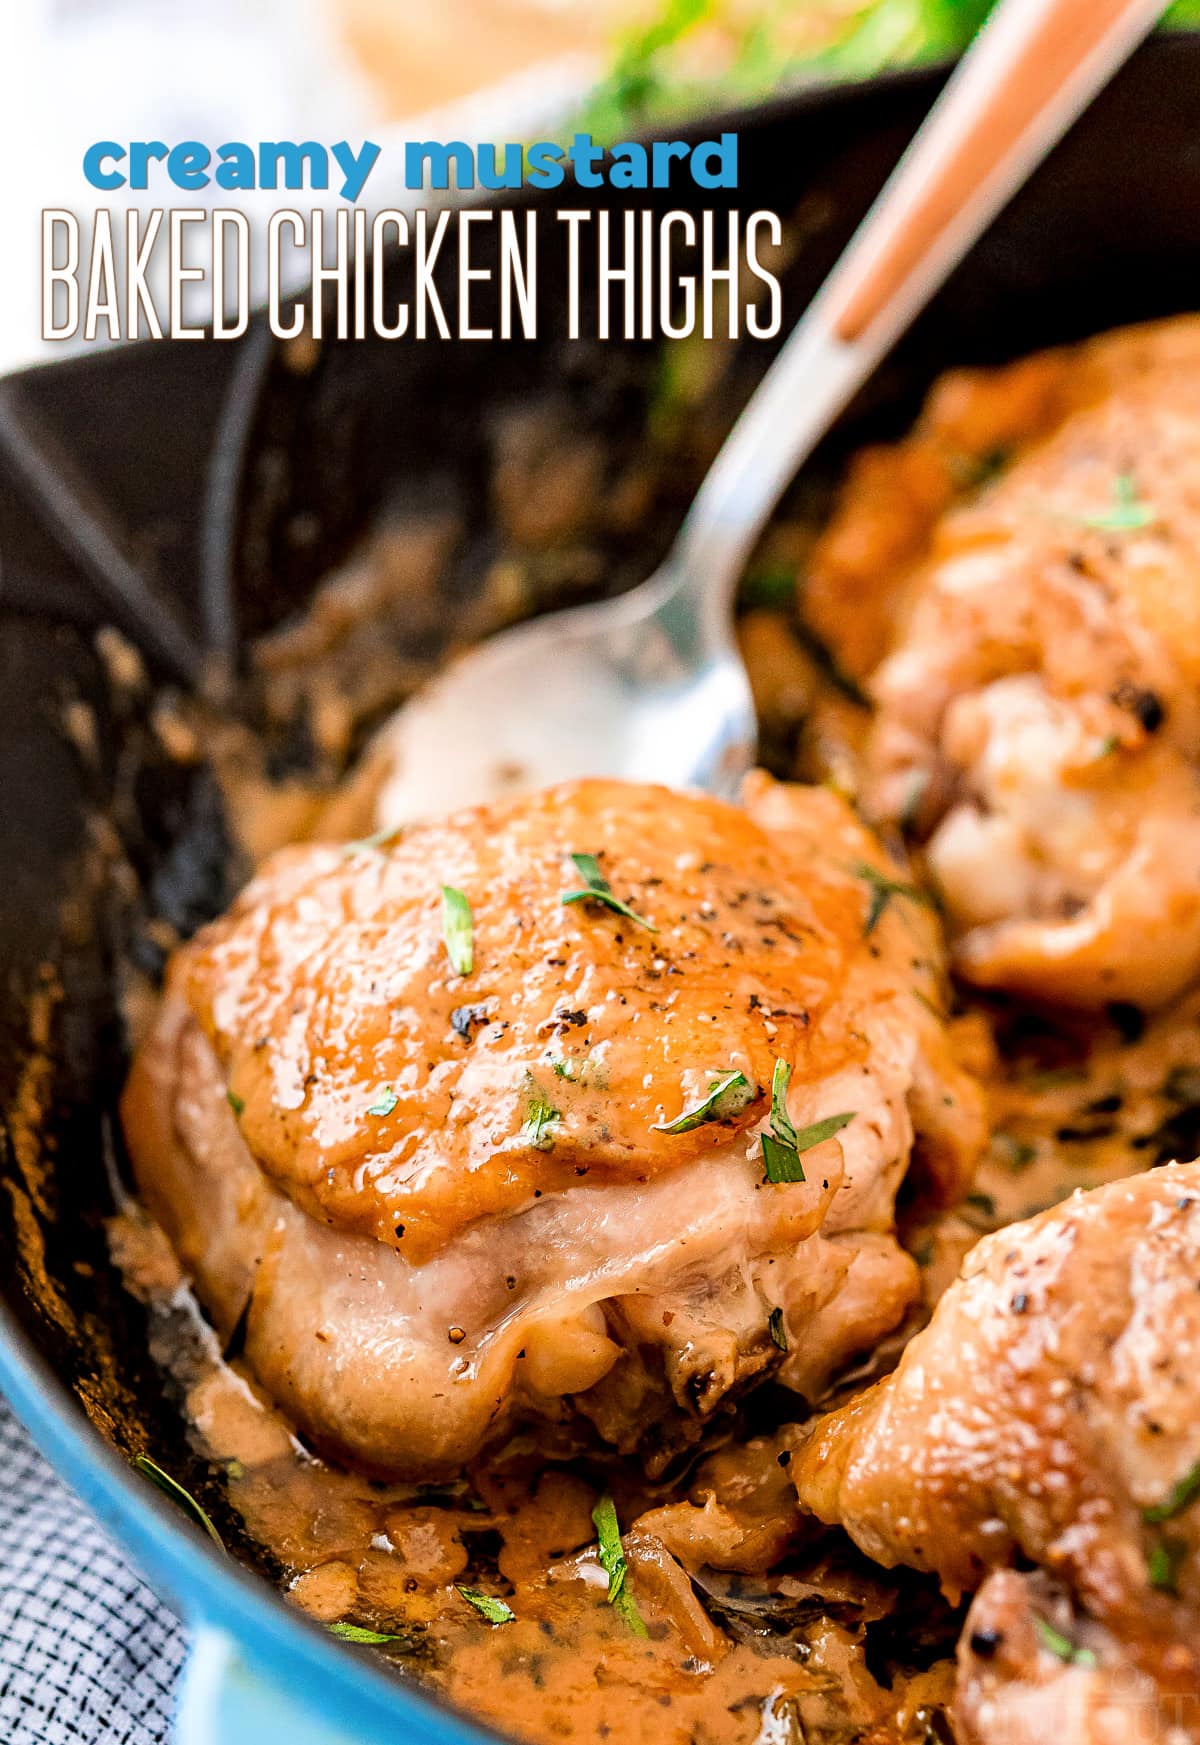 baked chicken thighs with mustard sauce in cast iron blue staub skillet with text overlay